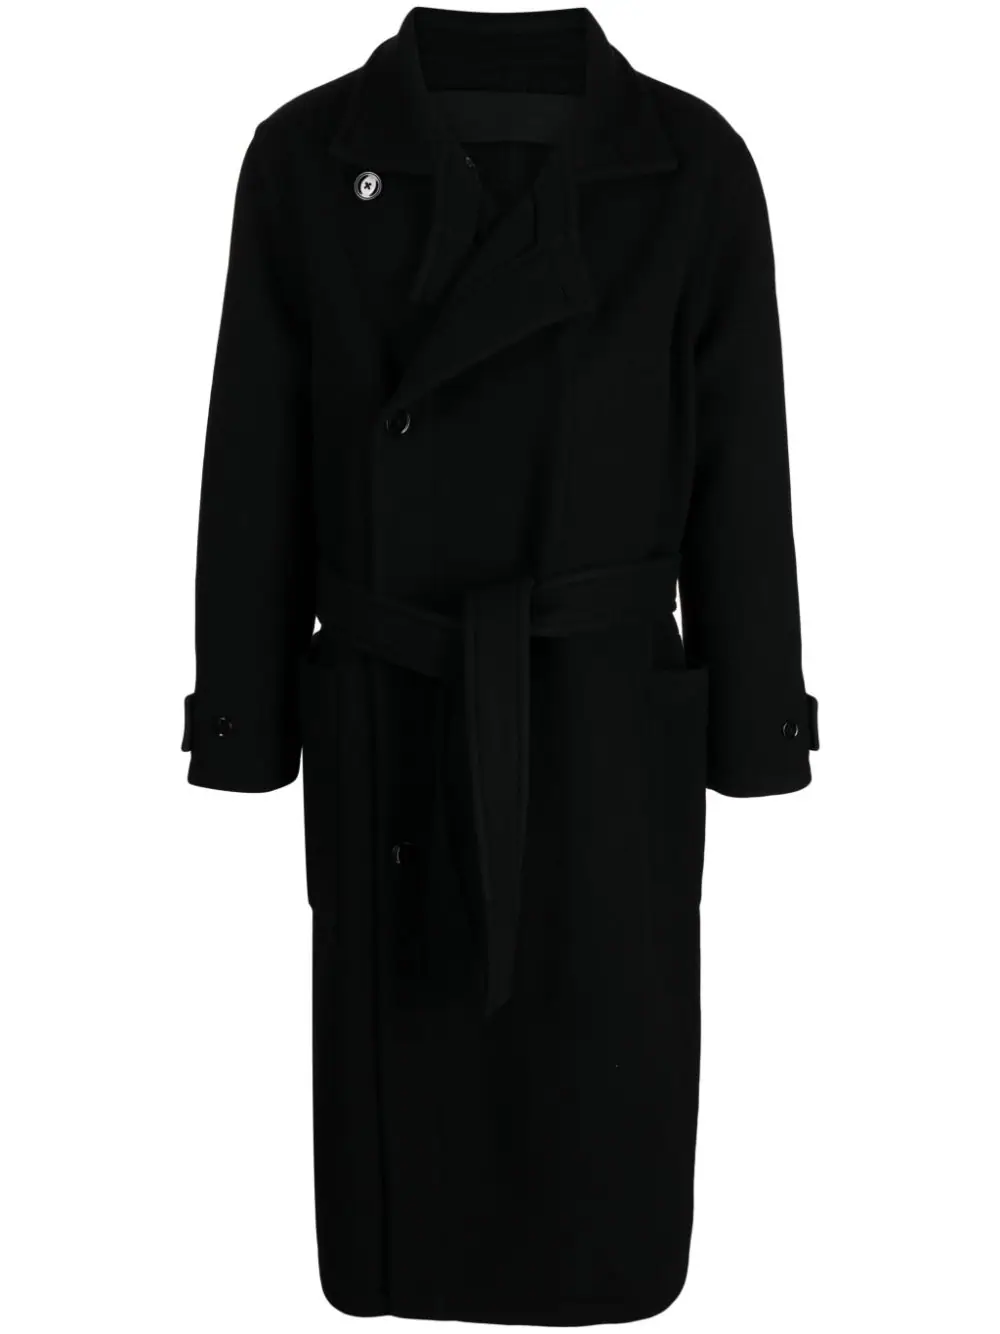 LEMAIRE SINGLE-BREASTED COAT WITH BELT